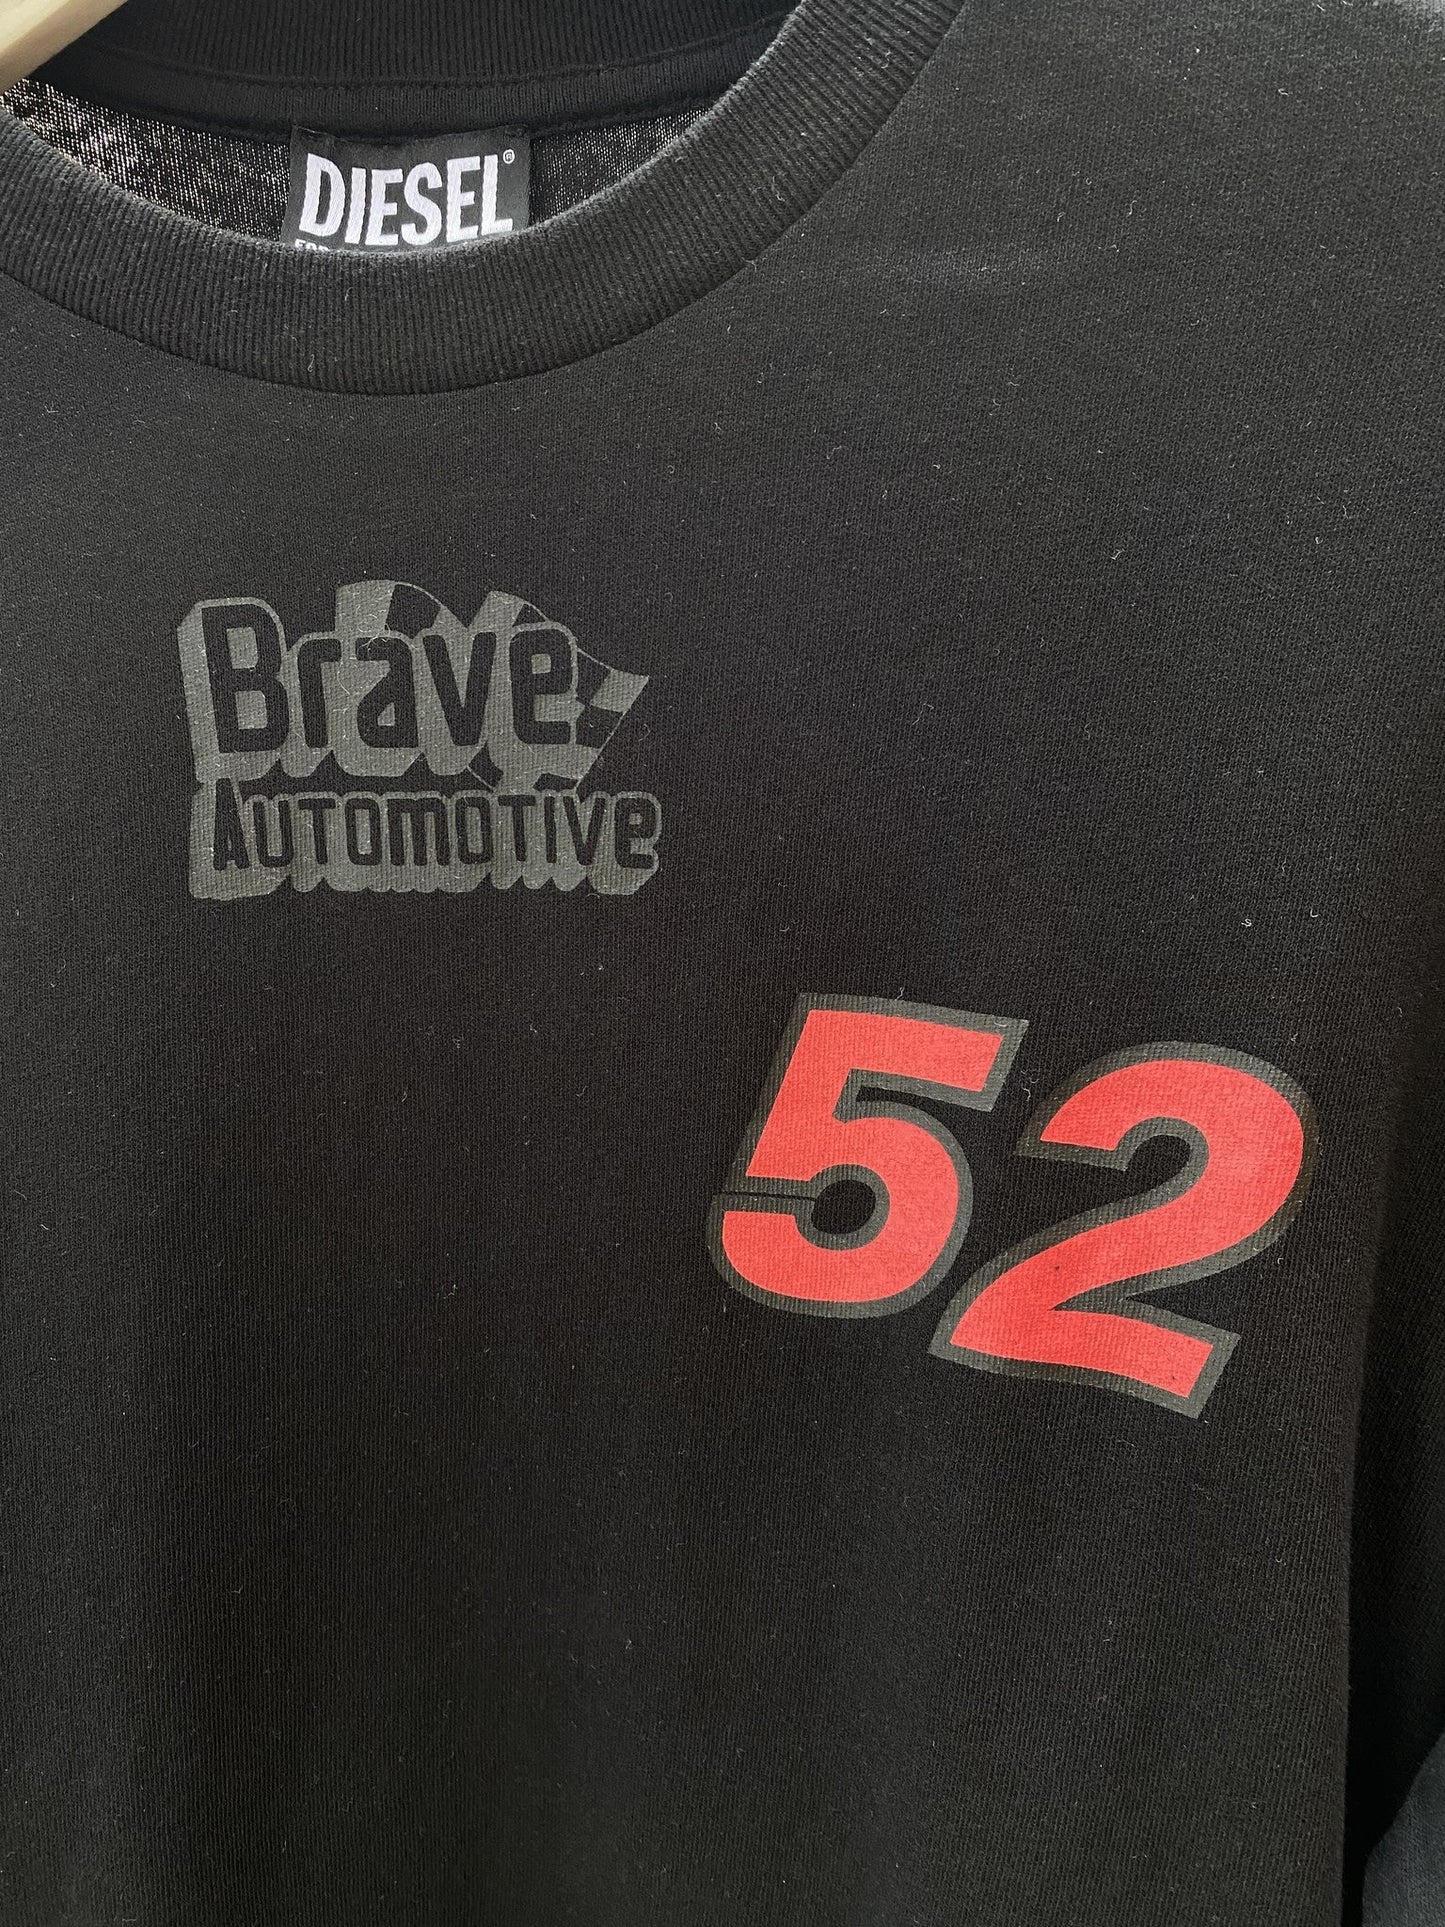 A DIESEL T-JUST-LS-C3 BLACK graphic t-shirt with the words "Brave Automotive" on it.